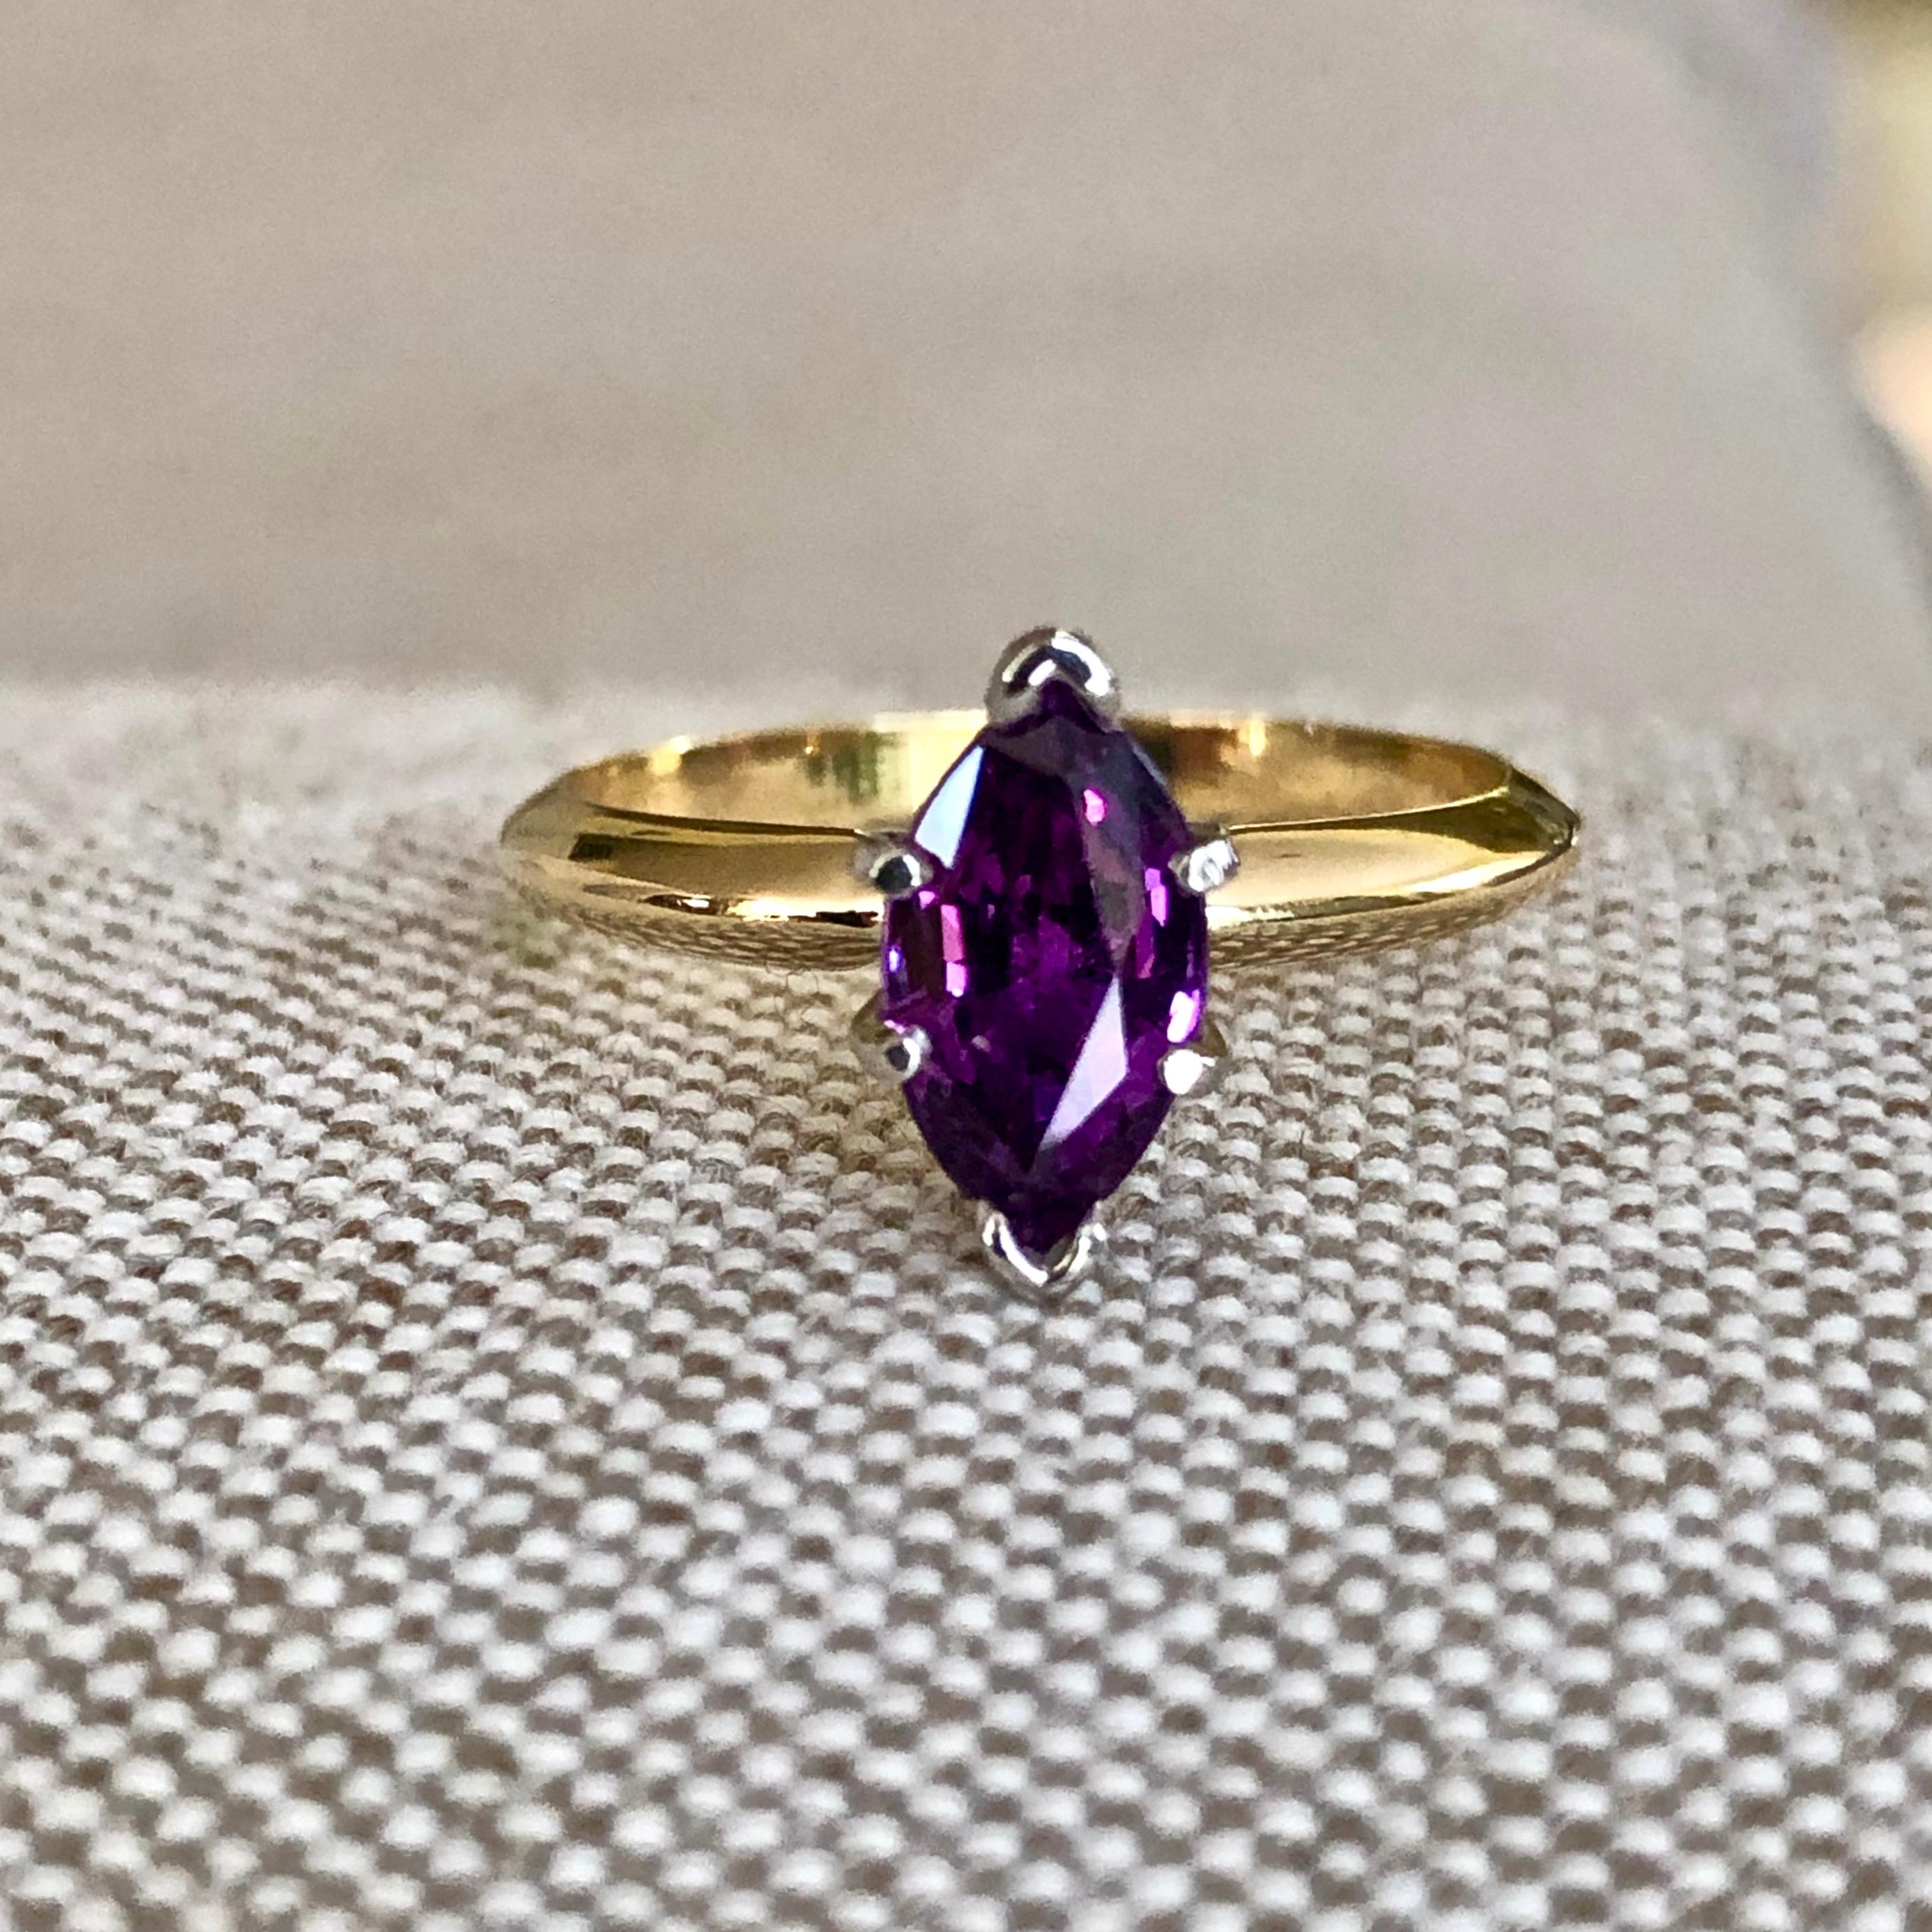 Natural purple sapphire marquise cut engagement ring. 18k yellow gold and platinum setting. 
1 Marquise sapphire total weight 1.39cts, Natural purple color, VS in clarity. 
Size 6.25 and sizable. 2.95 grams 
Estate/Excellent Condition